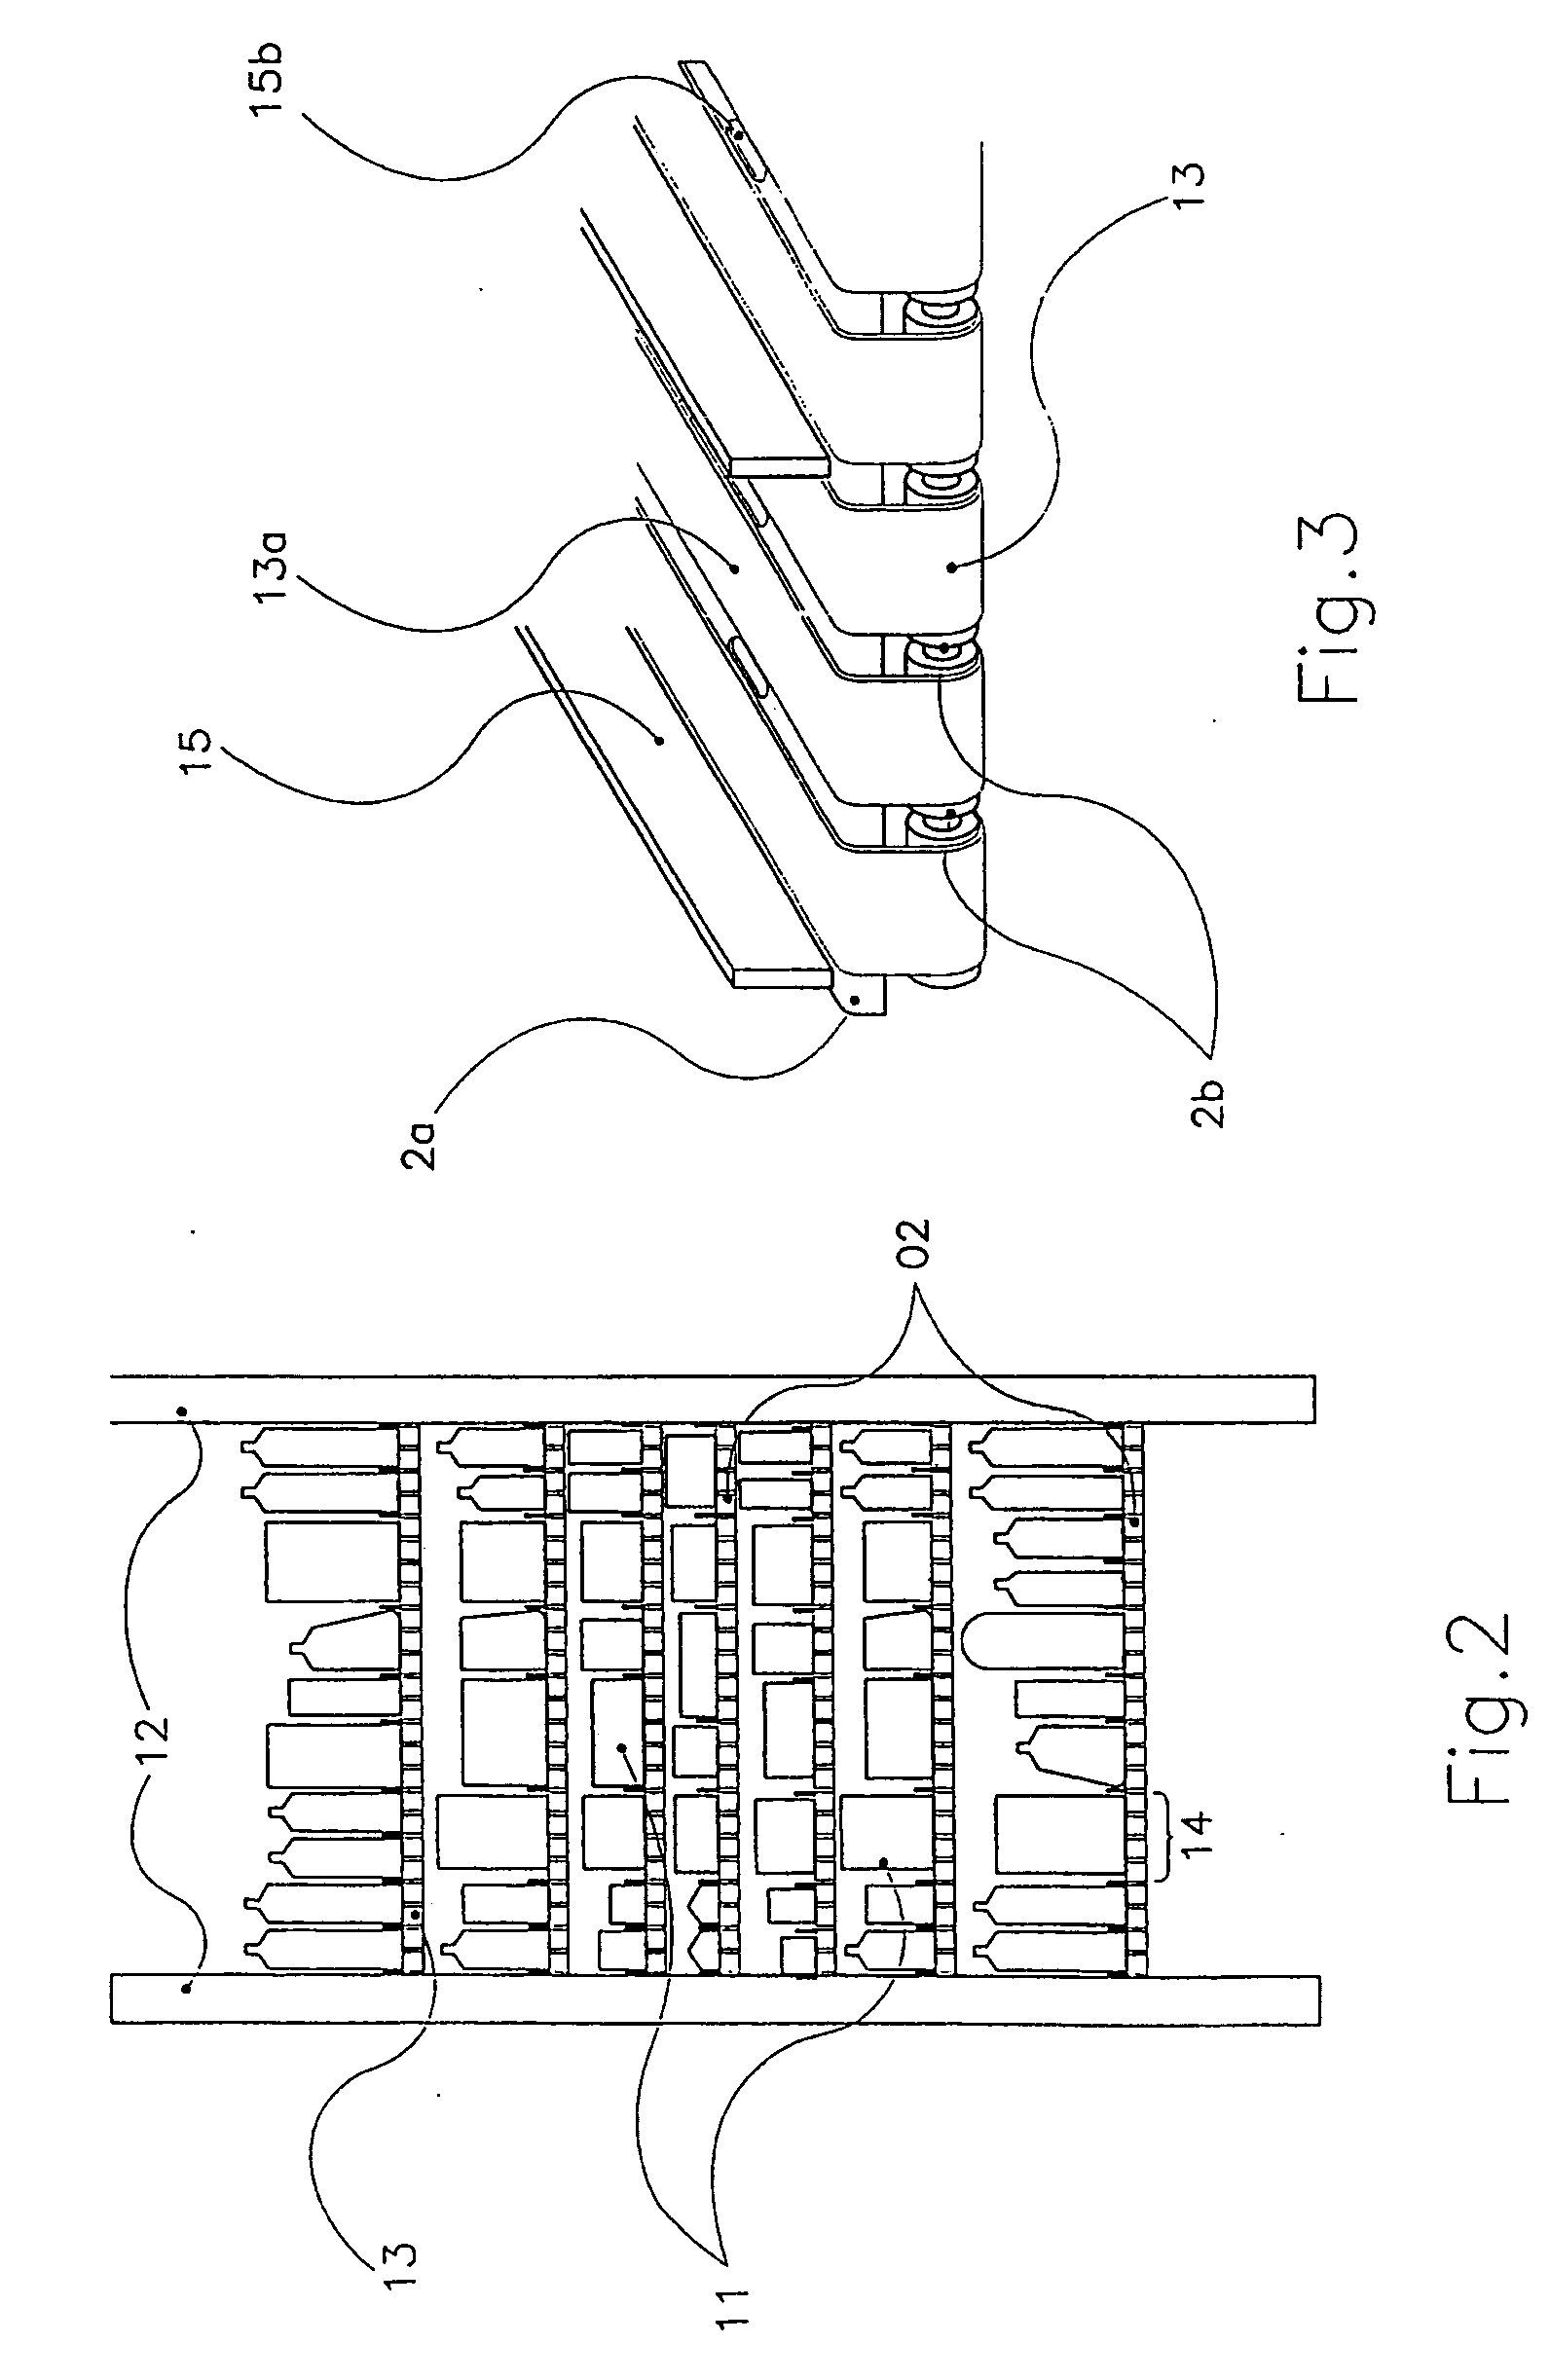 Method and automated system for storing and distributing various objects or articles